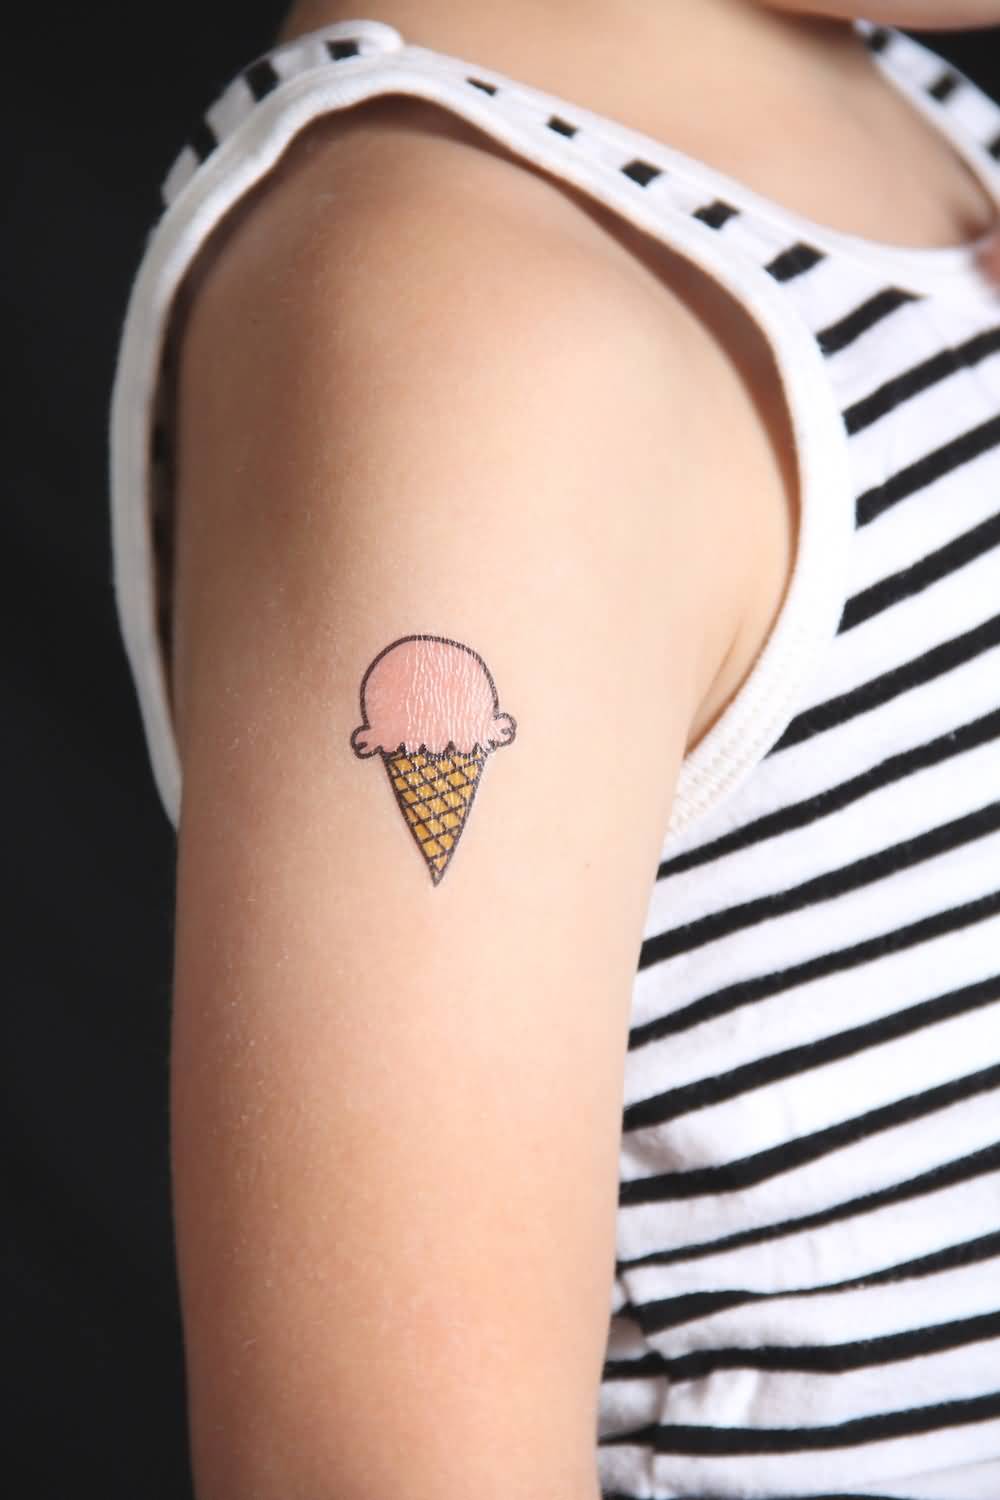 Small Ice Cream Tattoo On Right Shoulder